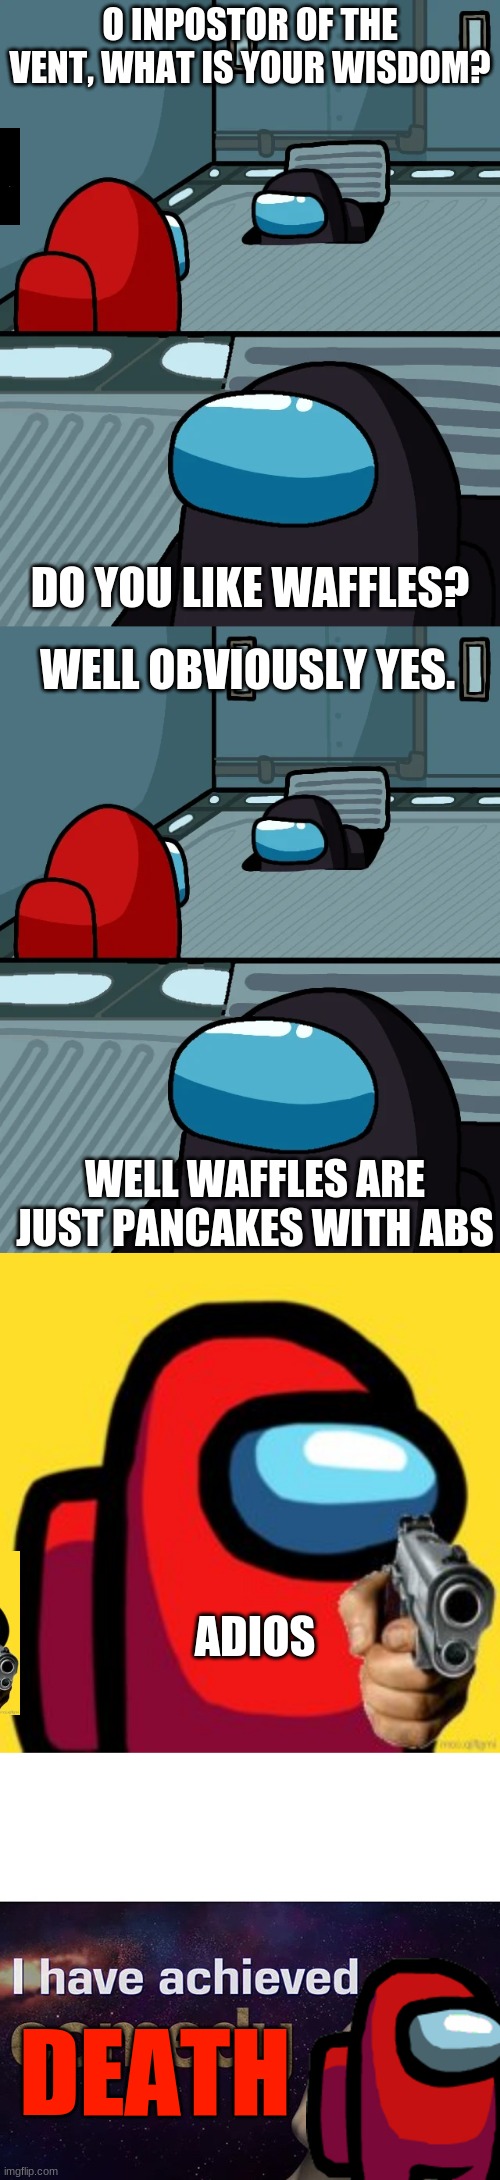 O INPOSTOR OF THE VENT, WHAT IS YOUR WISDOM? DO YOU LIKE WAFFLES? WELL OBVIOUSLY YES. WELL WAFFLES ARE JUST PANCAKES WITH ABS; ADIOS; DEATH | image tagged in impostor of the vent,adios,i have achieved comedy | made w/ Imgflip meme maker